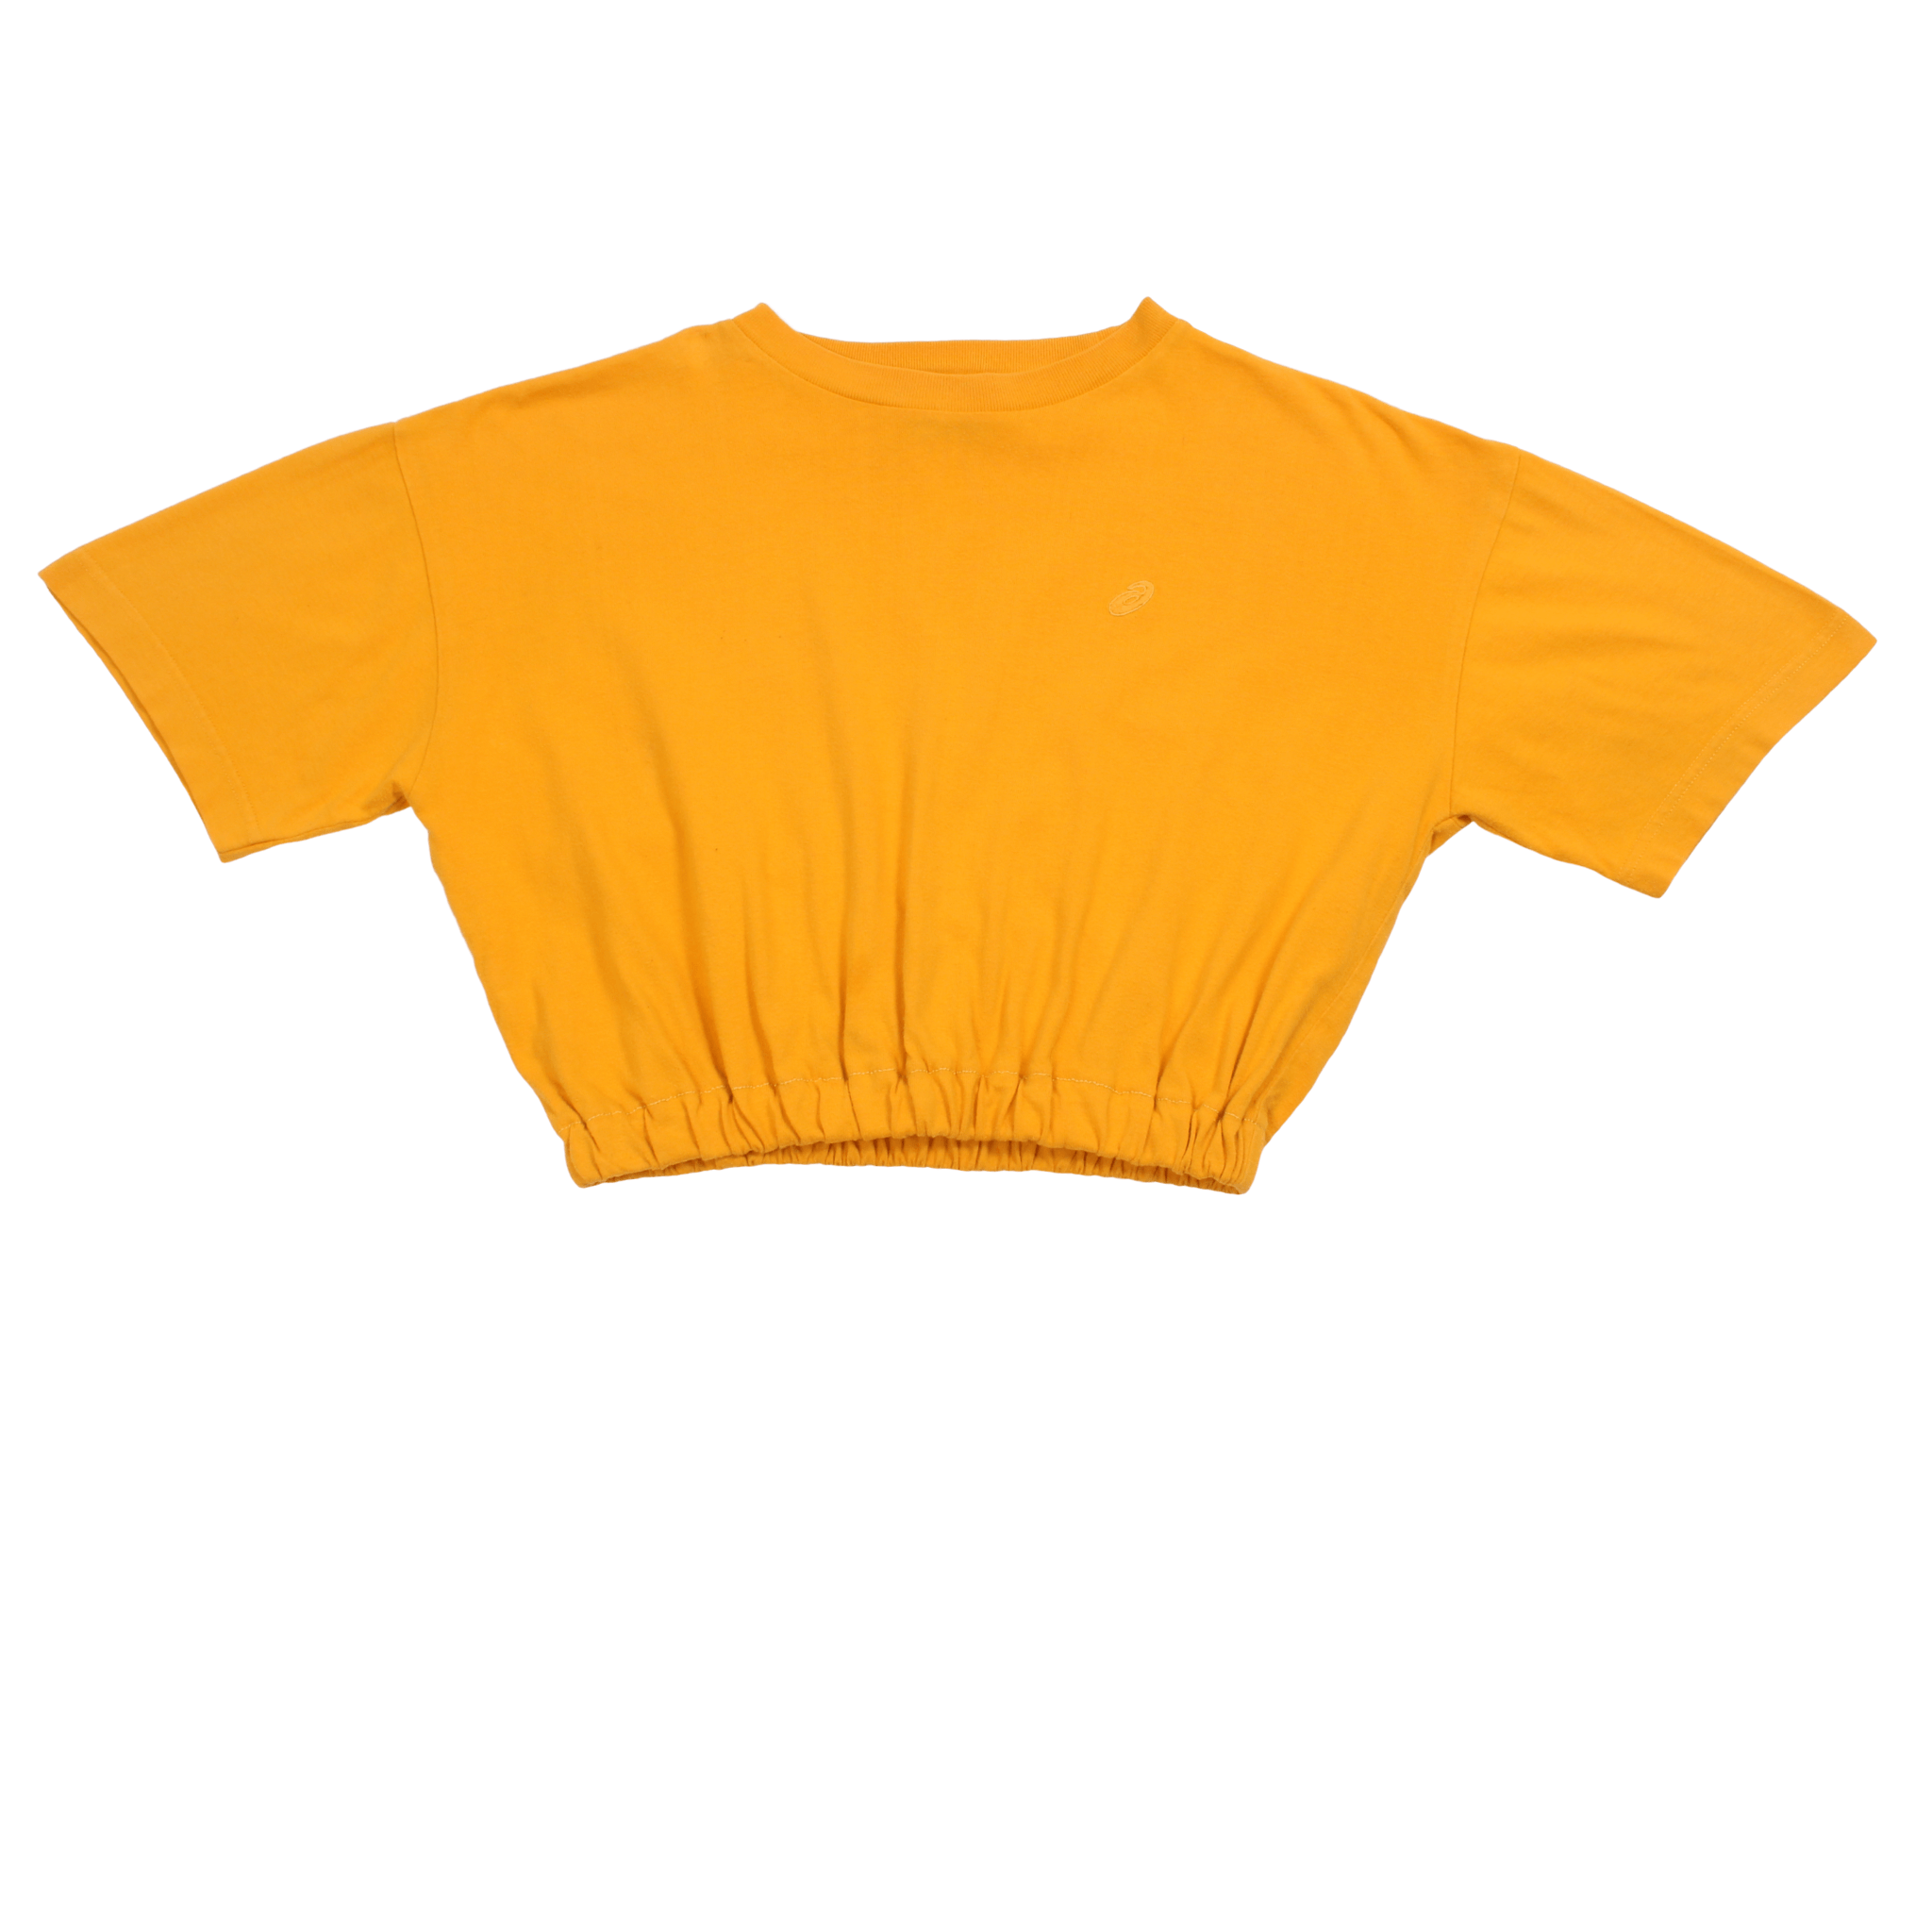 Vintage Asics Reworked Cropped T Shirt (S)